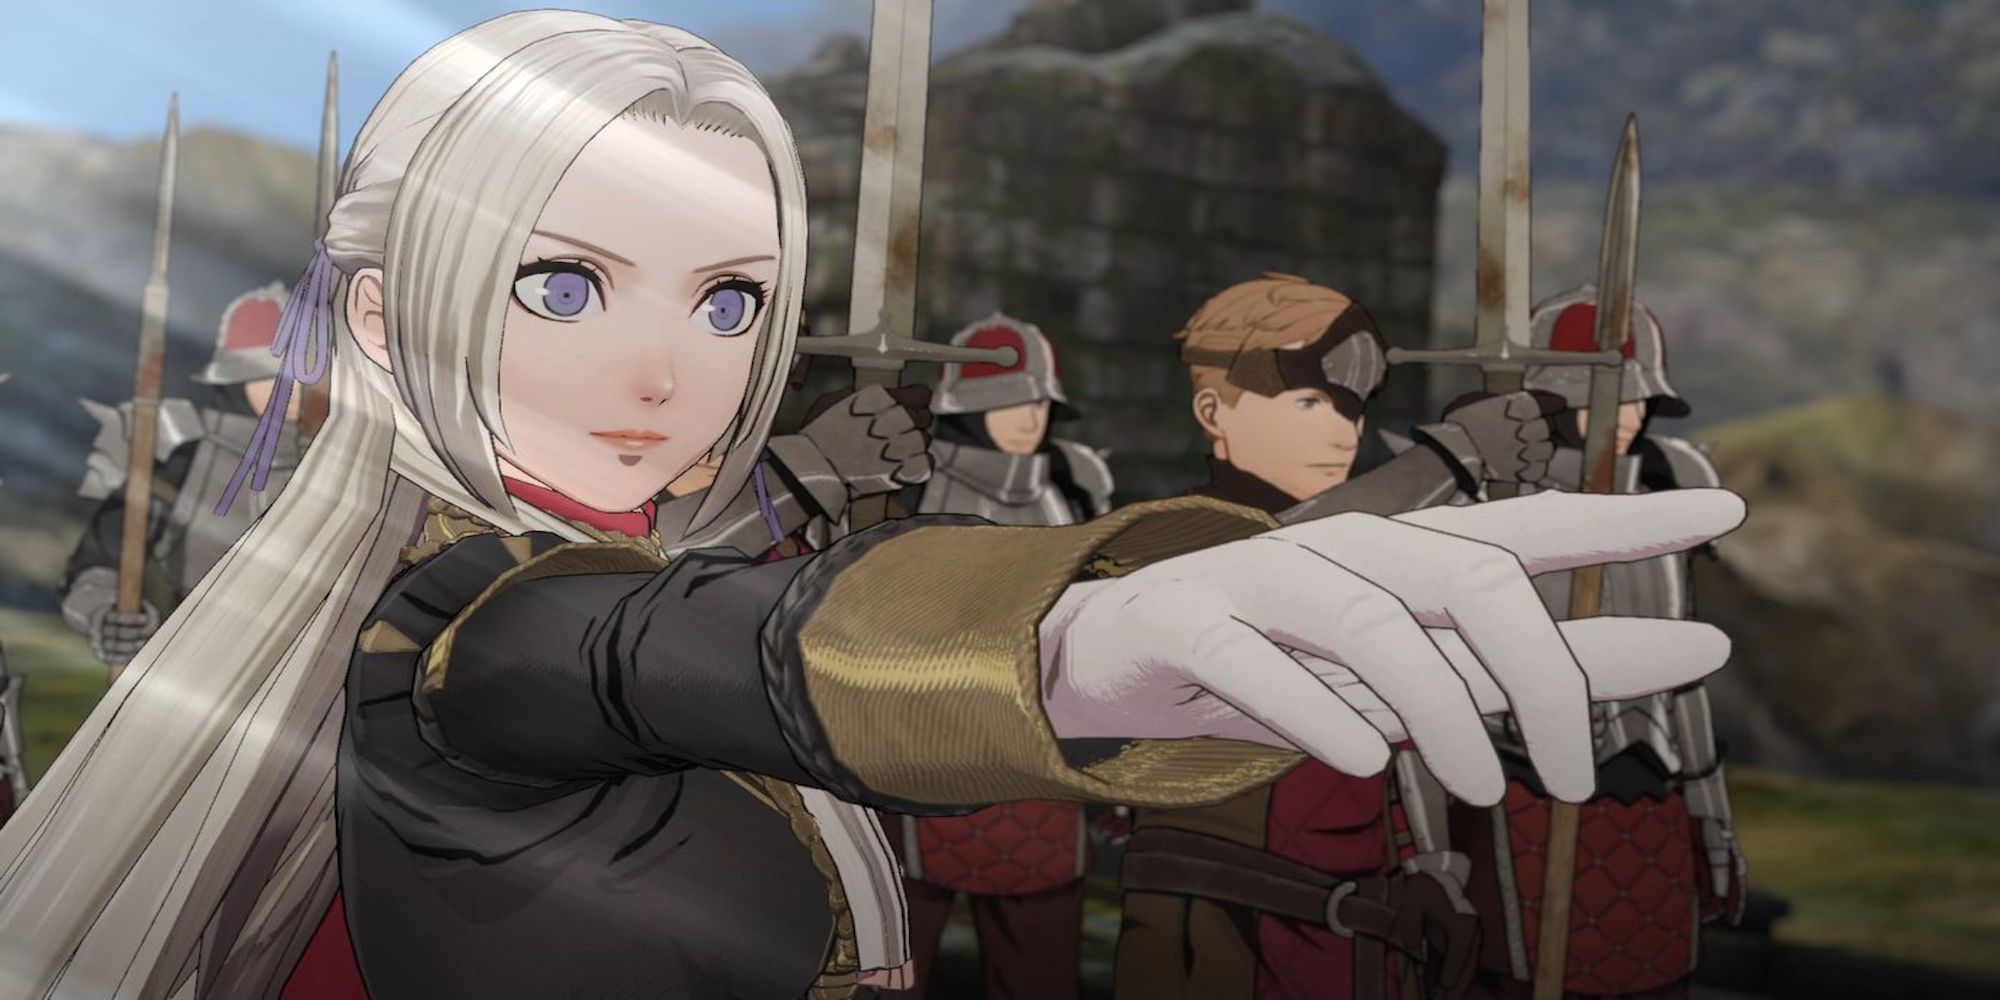 Edelgard pointing off-screen (Fire Emblem: Three Houses)